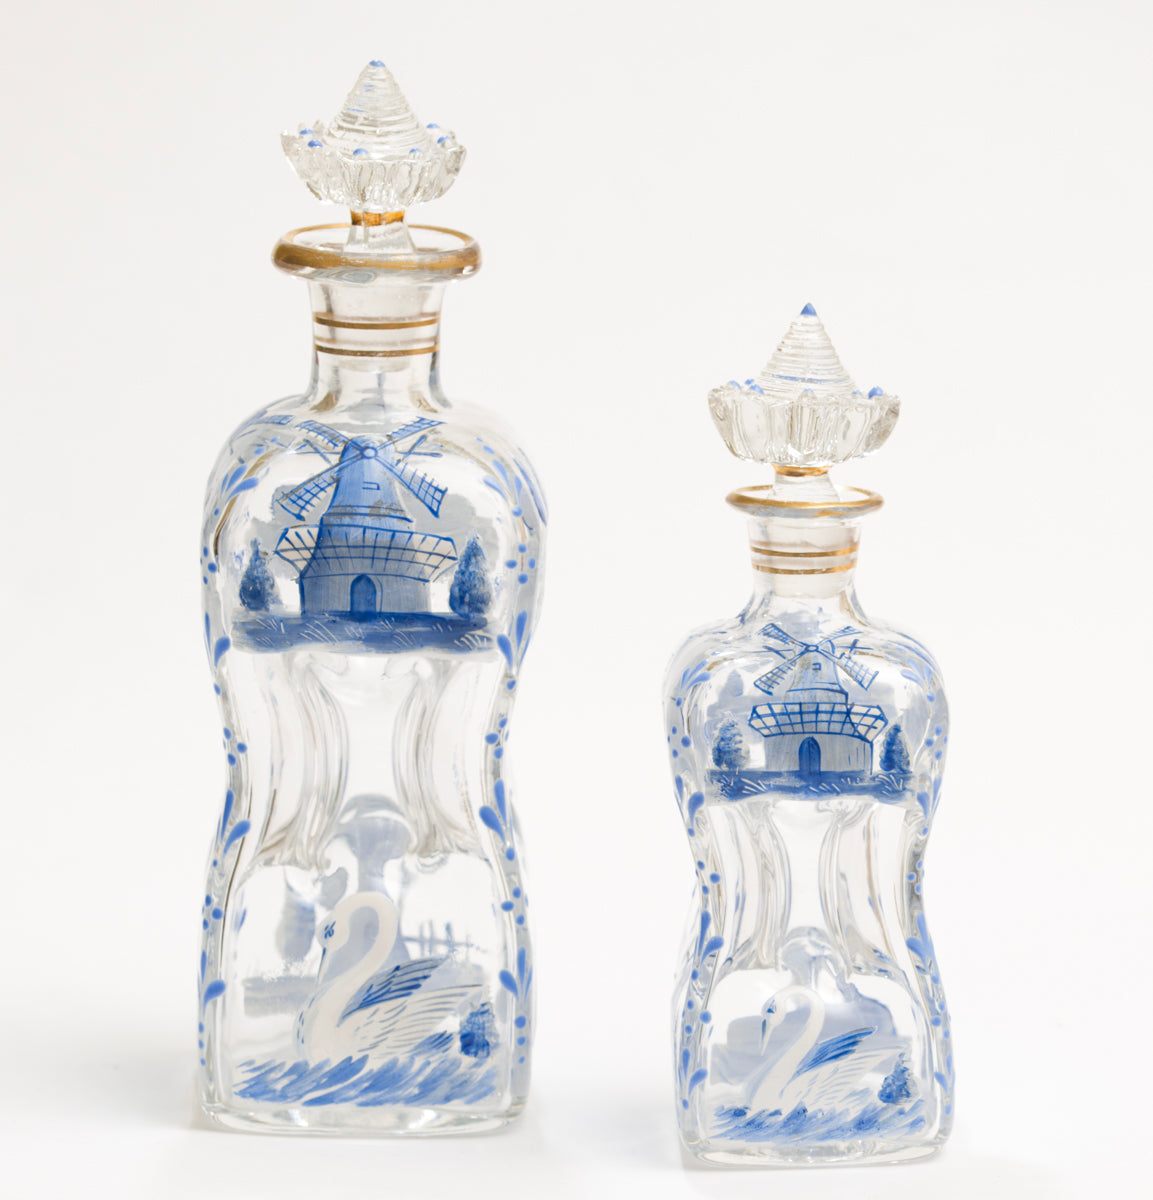 Two Antique Dutch Delft Hand Painted Glass Bottles/Kluck Decanters (3174)